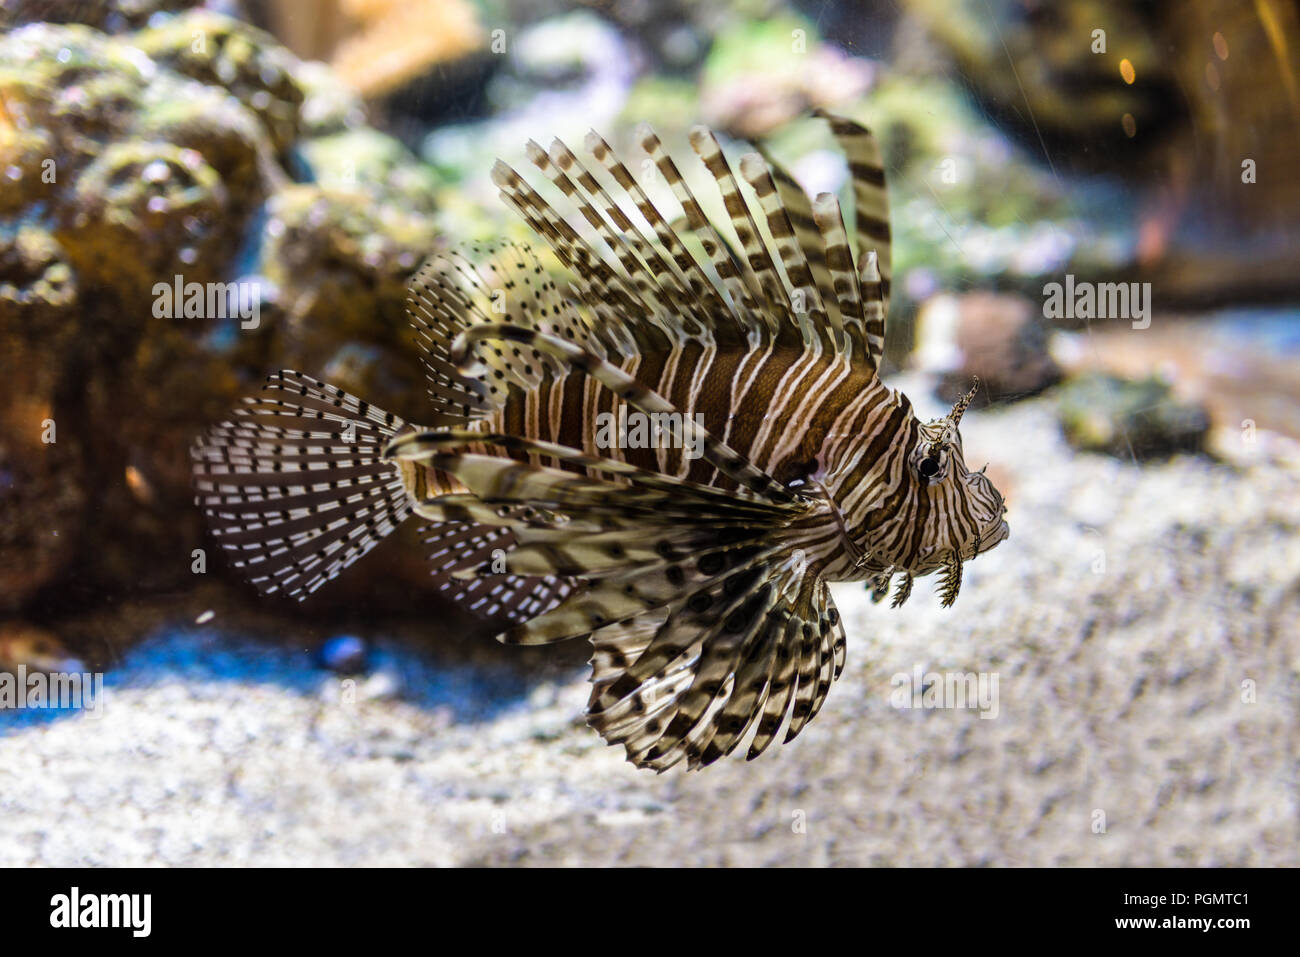 A Venomous Lionfish swimming in fish tank. It is a popular marine aquarium fish. The red lionfish, (Pterois volitans) is a venomous coral reef fish in Stock Photo